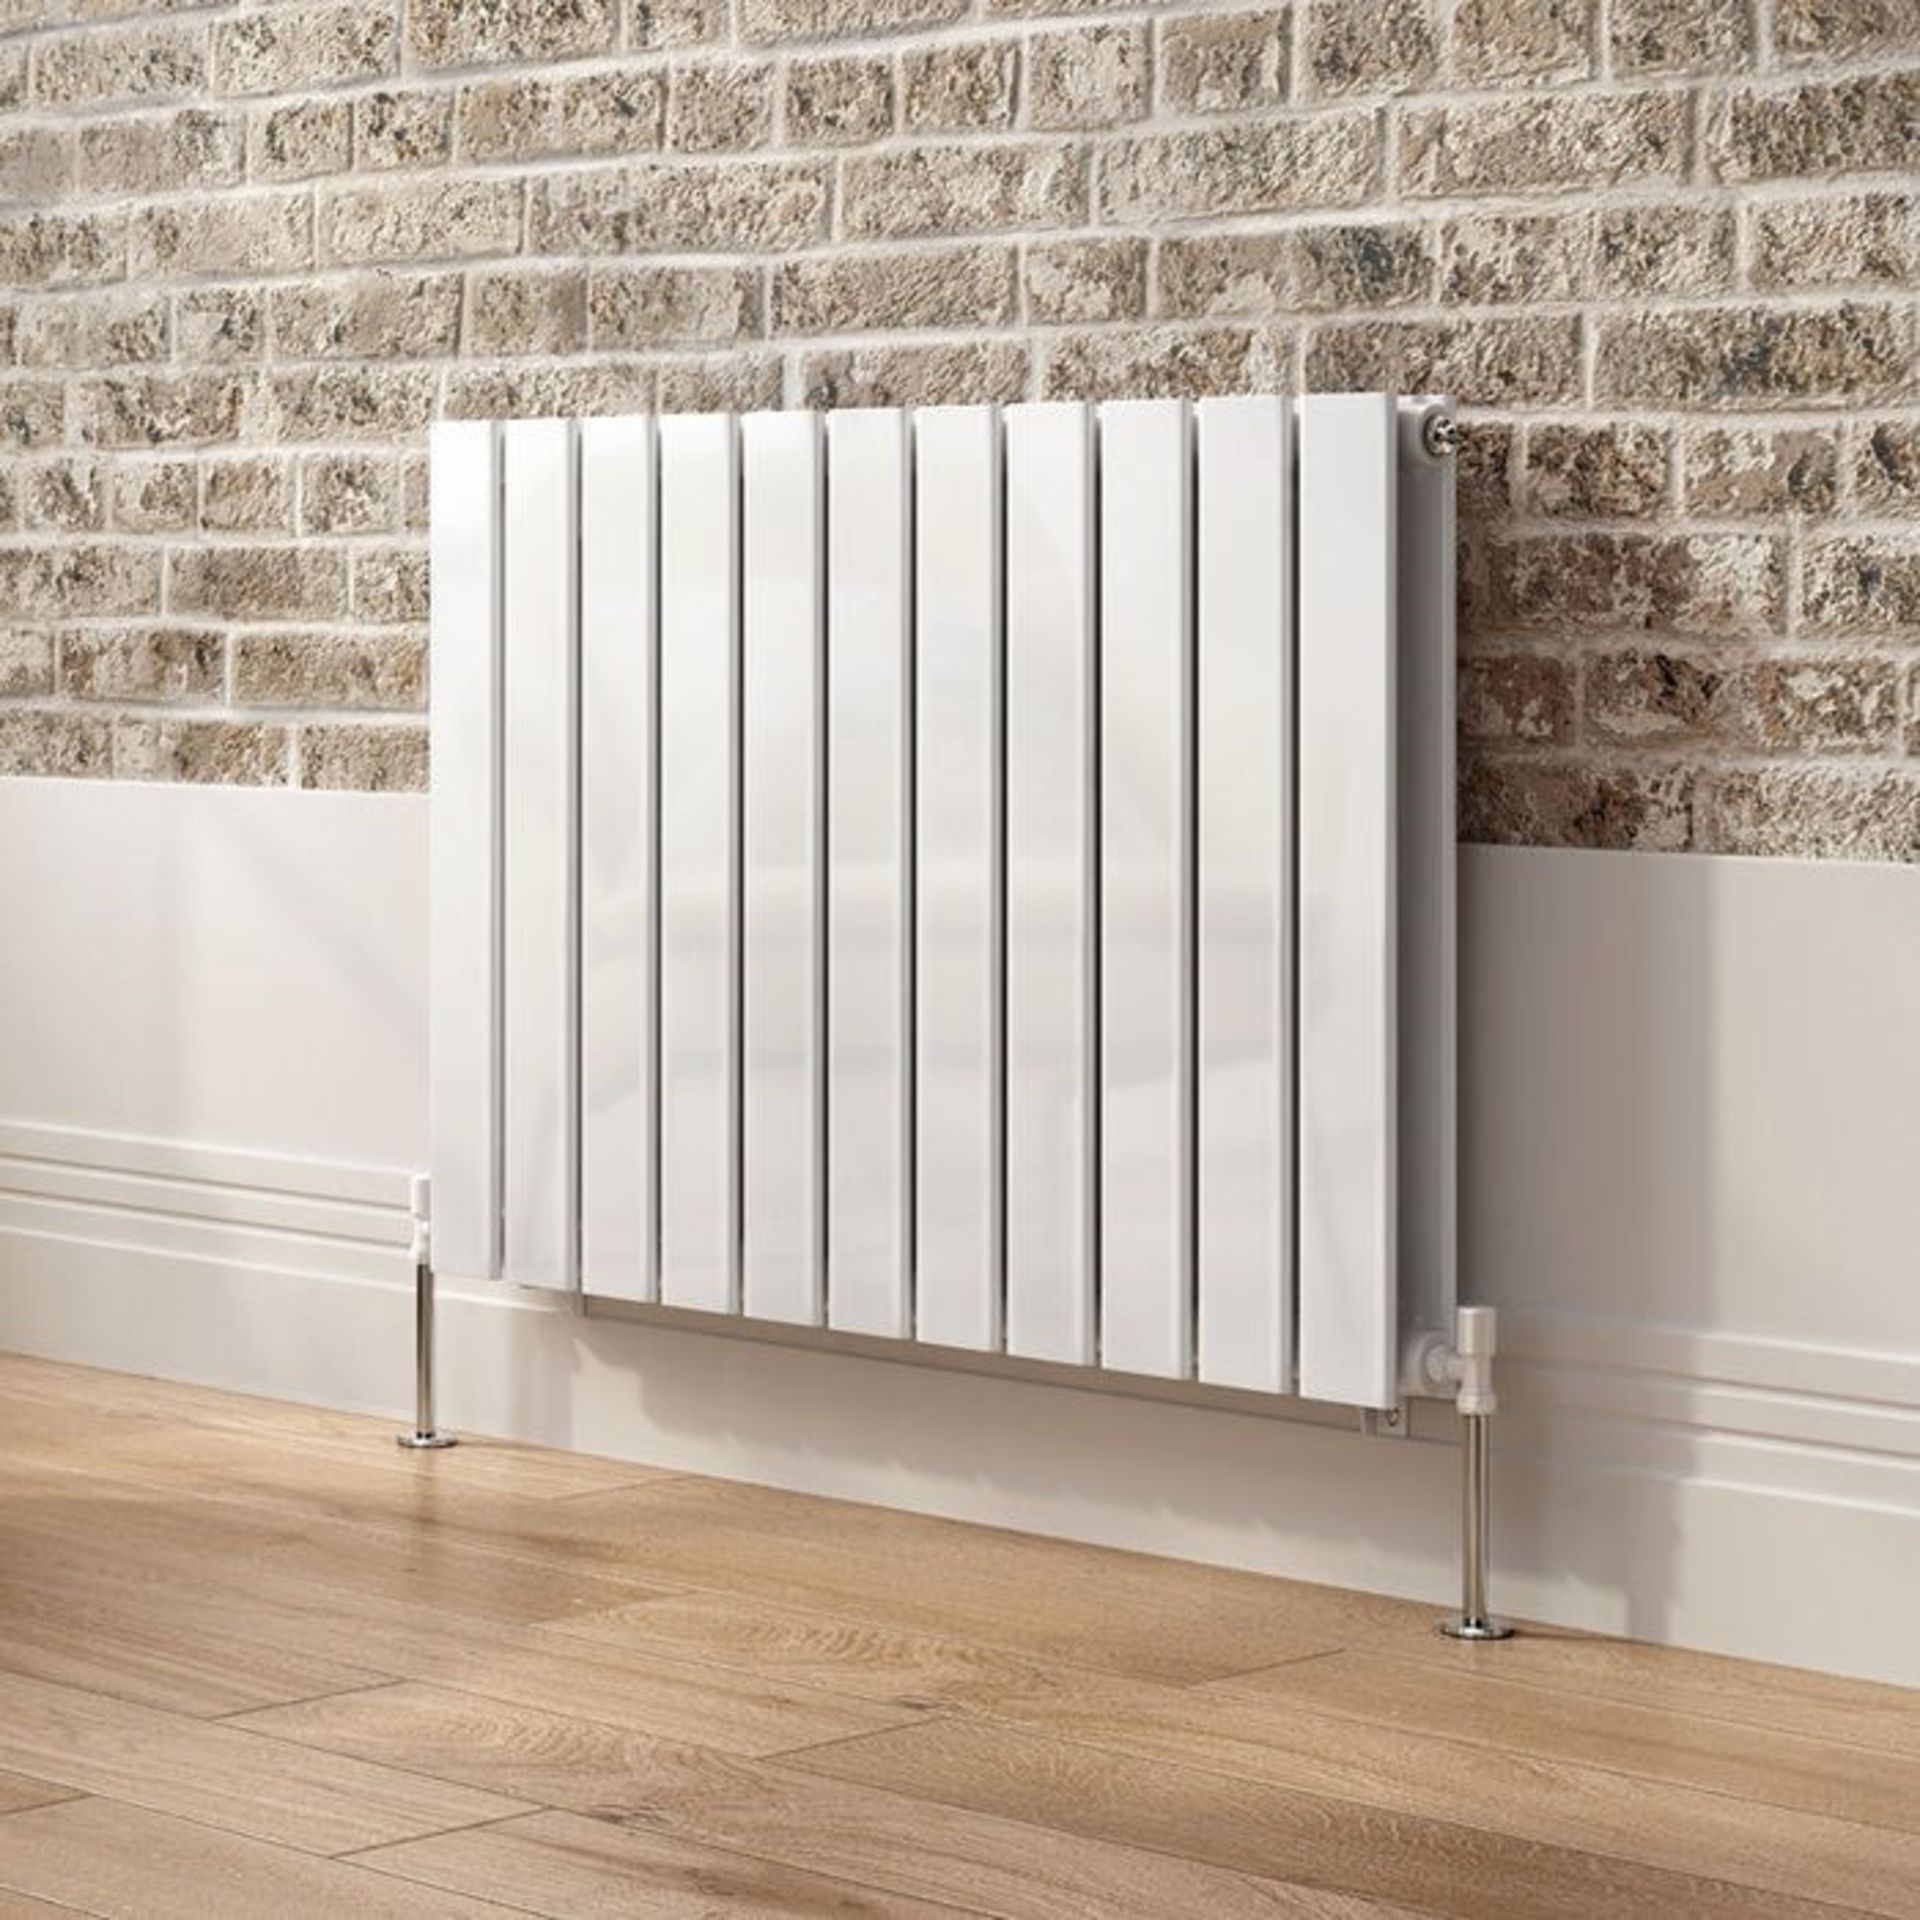 Brand New 600x830mm Gloss White Double Flat Panel Horizontal Radiator. RRP £474.99.RC221.Made with h - Image 2 of 2